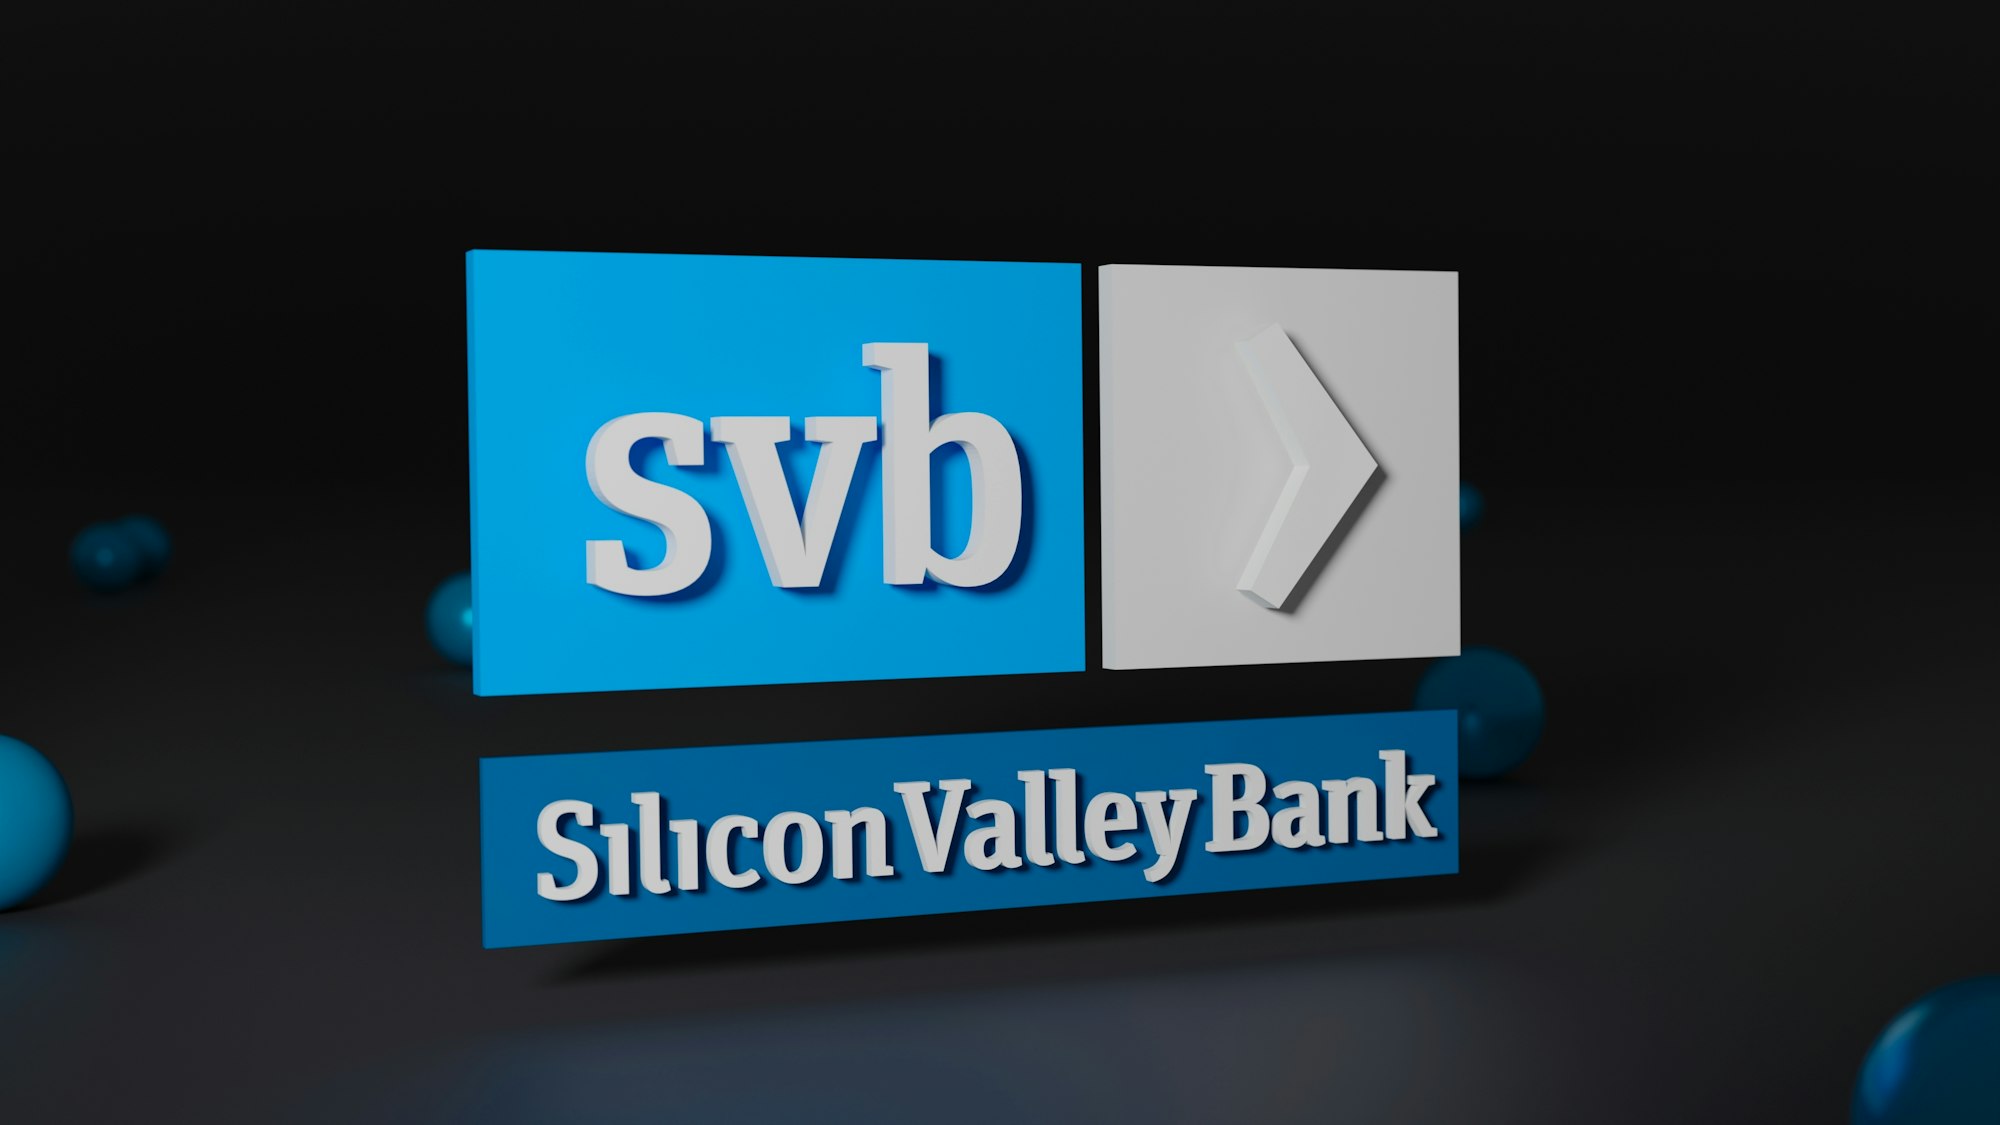 Silicon Valley Bank Logo in 3D. Feel free to contact me through email mariia.shalabaieva@gmail.com.